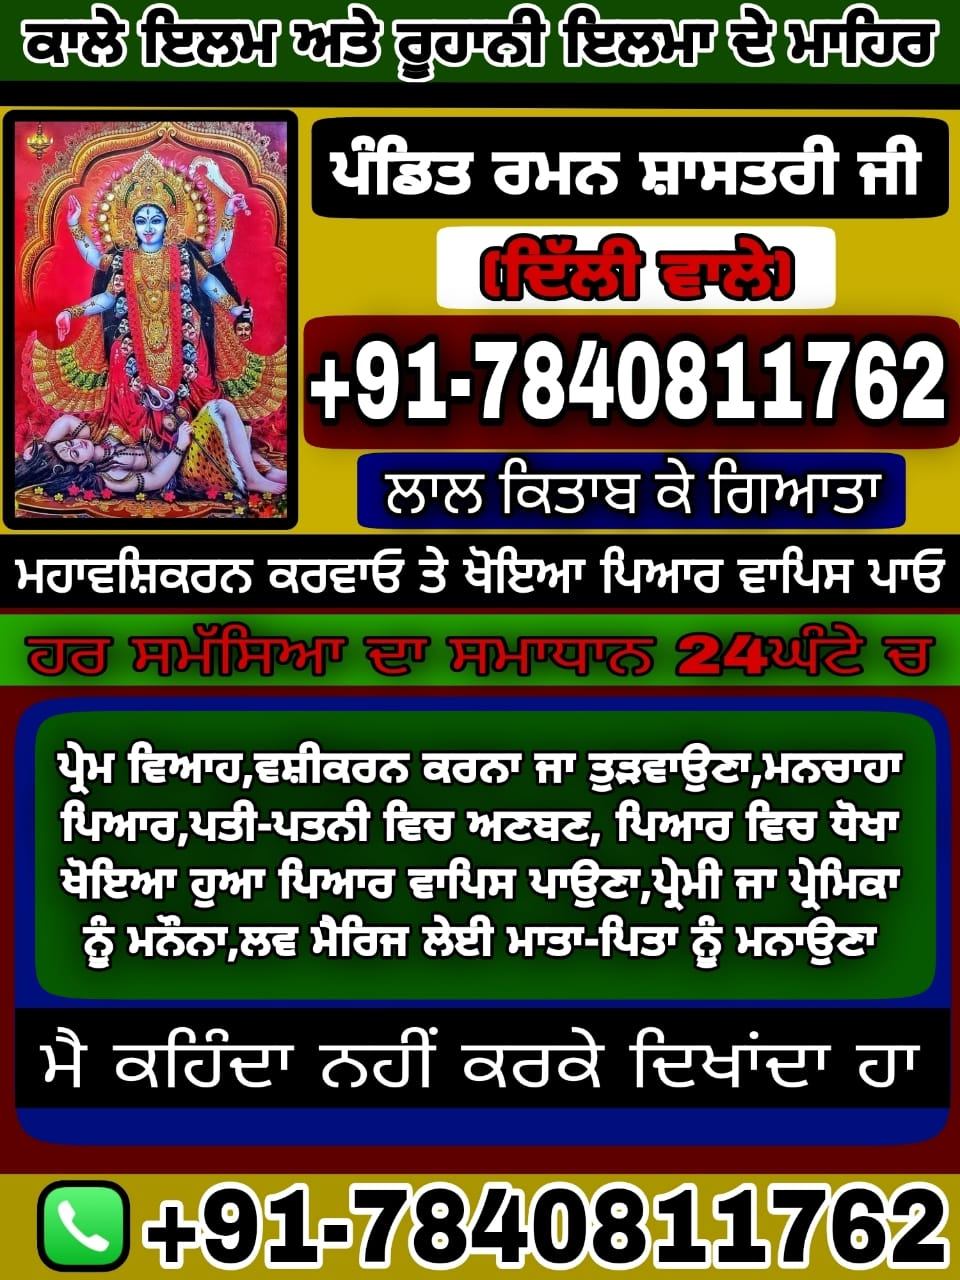 NO.1 ASTROLOGER IN INDIA.ALL PROBLEM SOLUTION WITHIN ONLY 24 HOURS